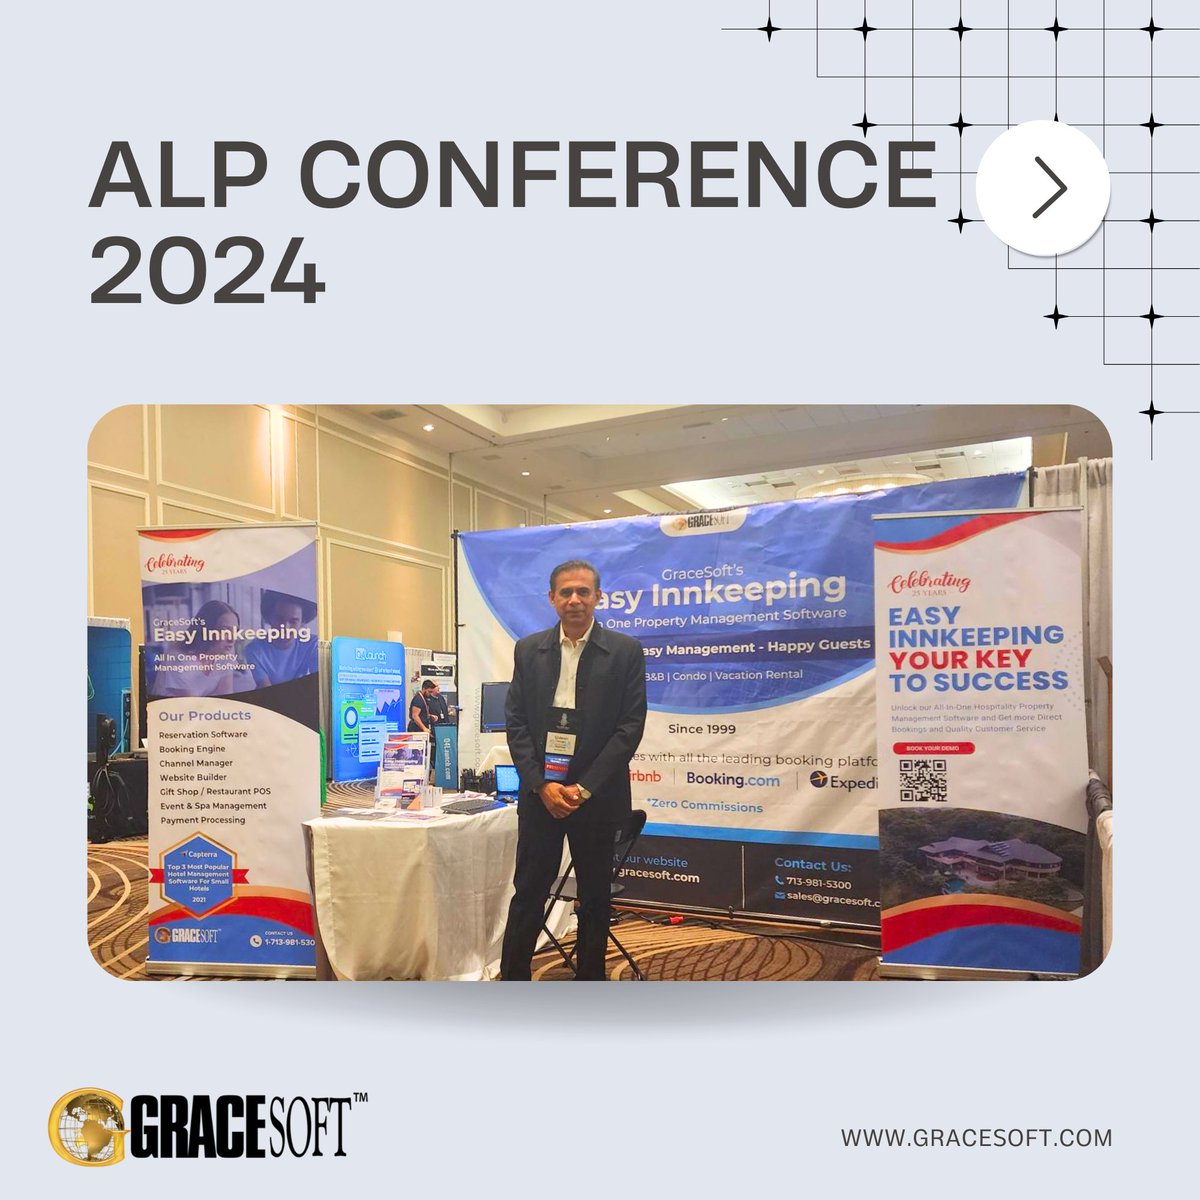 Thrilled to have had the opportunity to attend the ALP Conference 2024 in Orlando! 

#ALPConference2024  #HospitalityInnovation #GraceSoftInnovates #OrlandoEvents